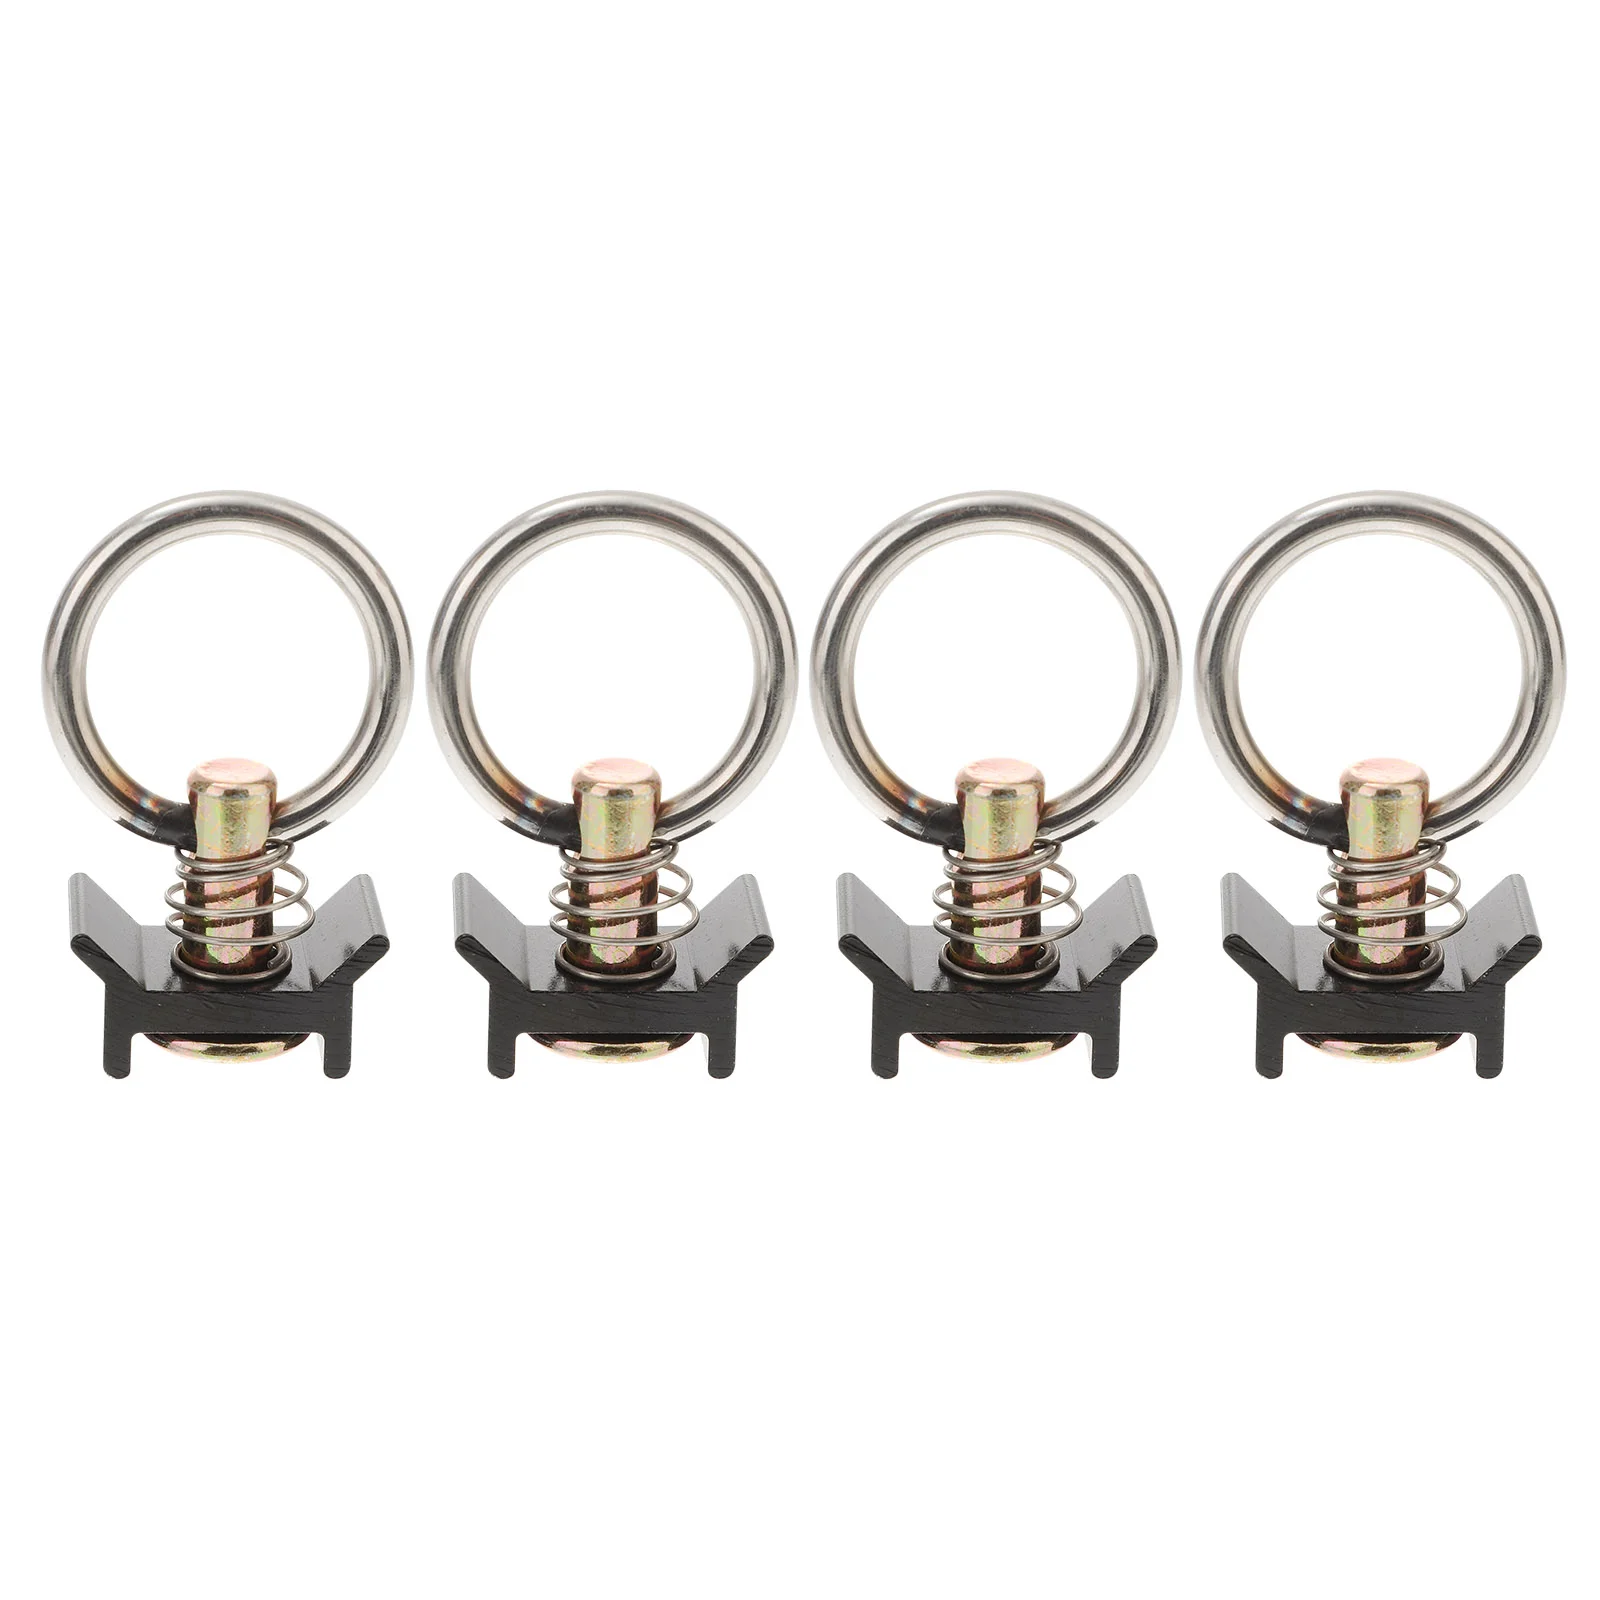 

4 Pcs E Track Accessories L Rails Fitting Bolt Rings Tie down Steel Stud Fitting With Round Ring Downs